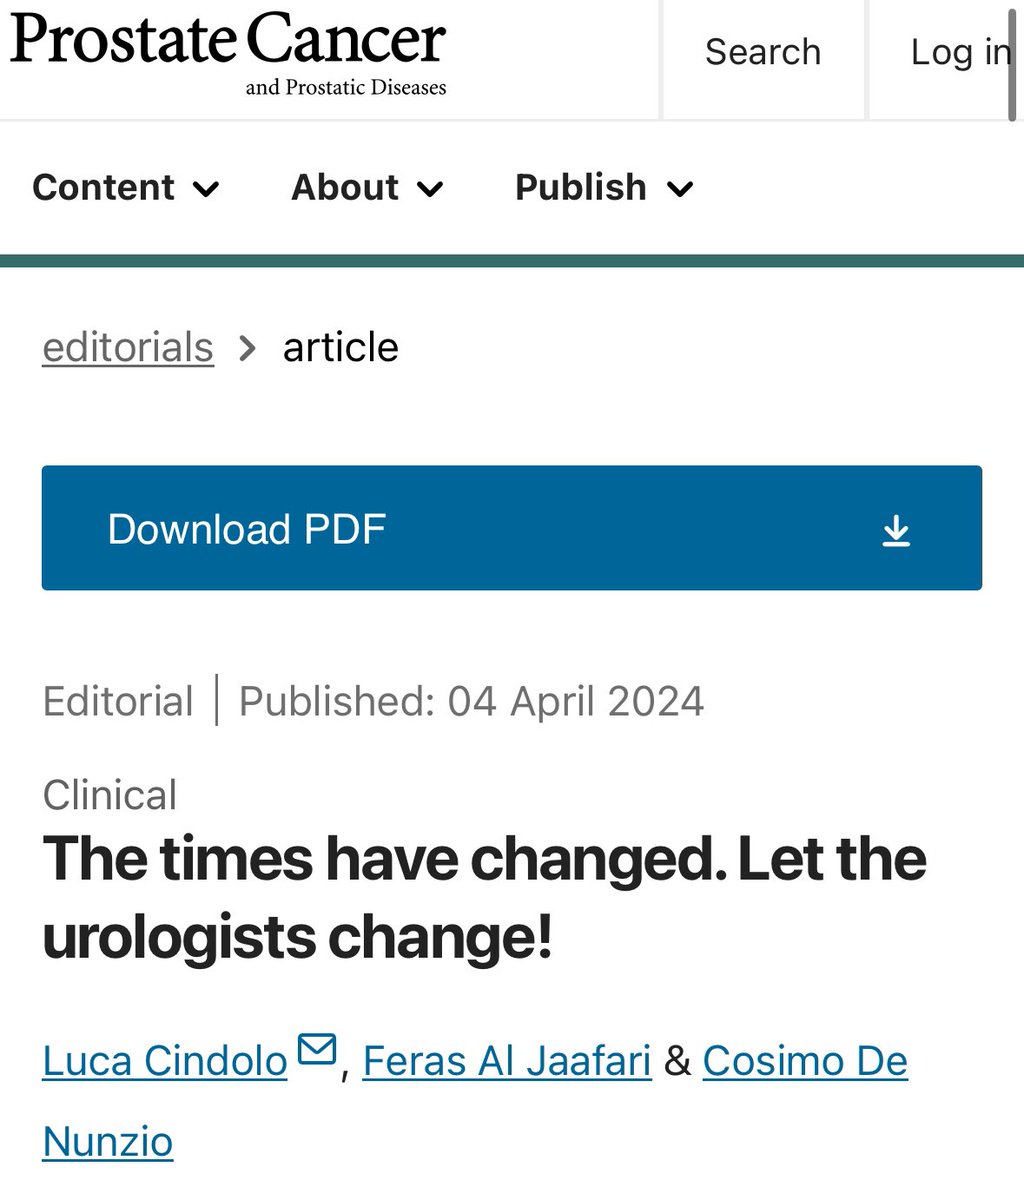 “The times have changed .. Let the urologists change!” It was my pleasure to work on this editorial with like minded friends! @lucacindolo @cosimodenunzio #BPH I hope you enjoy the read : nature.com/articles/s4139…